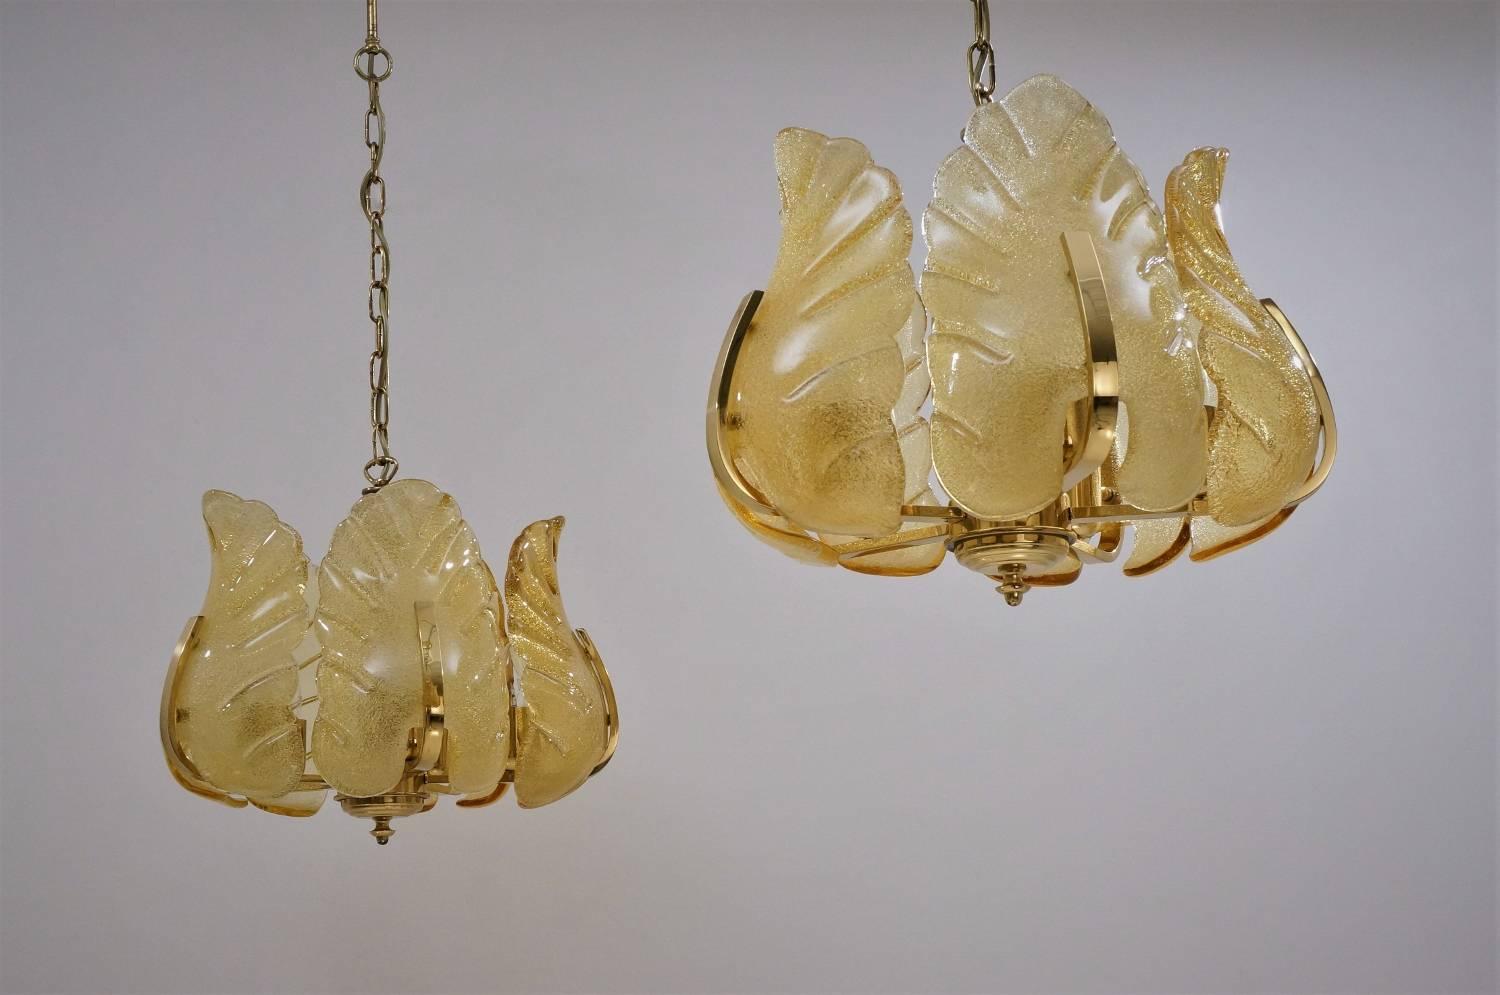 Polished Carl Fagerlund Orrefors Chandeliers, a Matching Pair, circa 1960